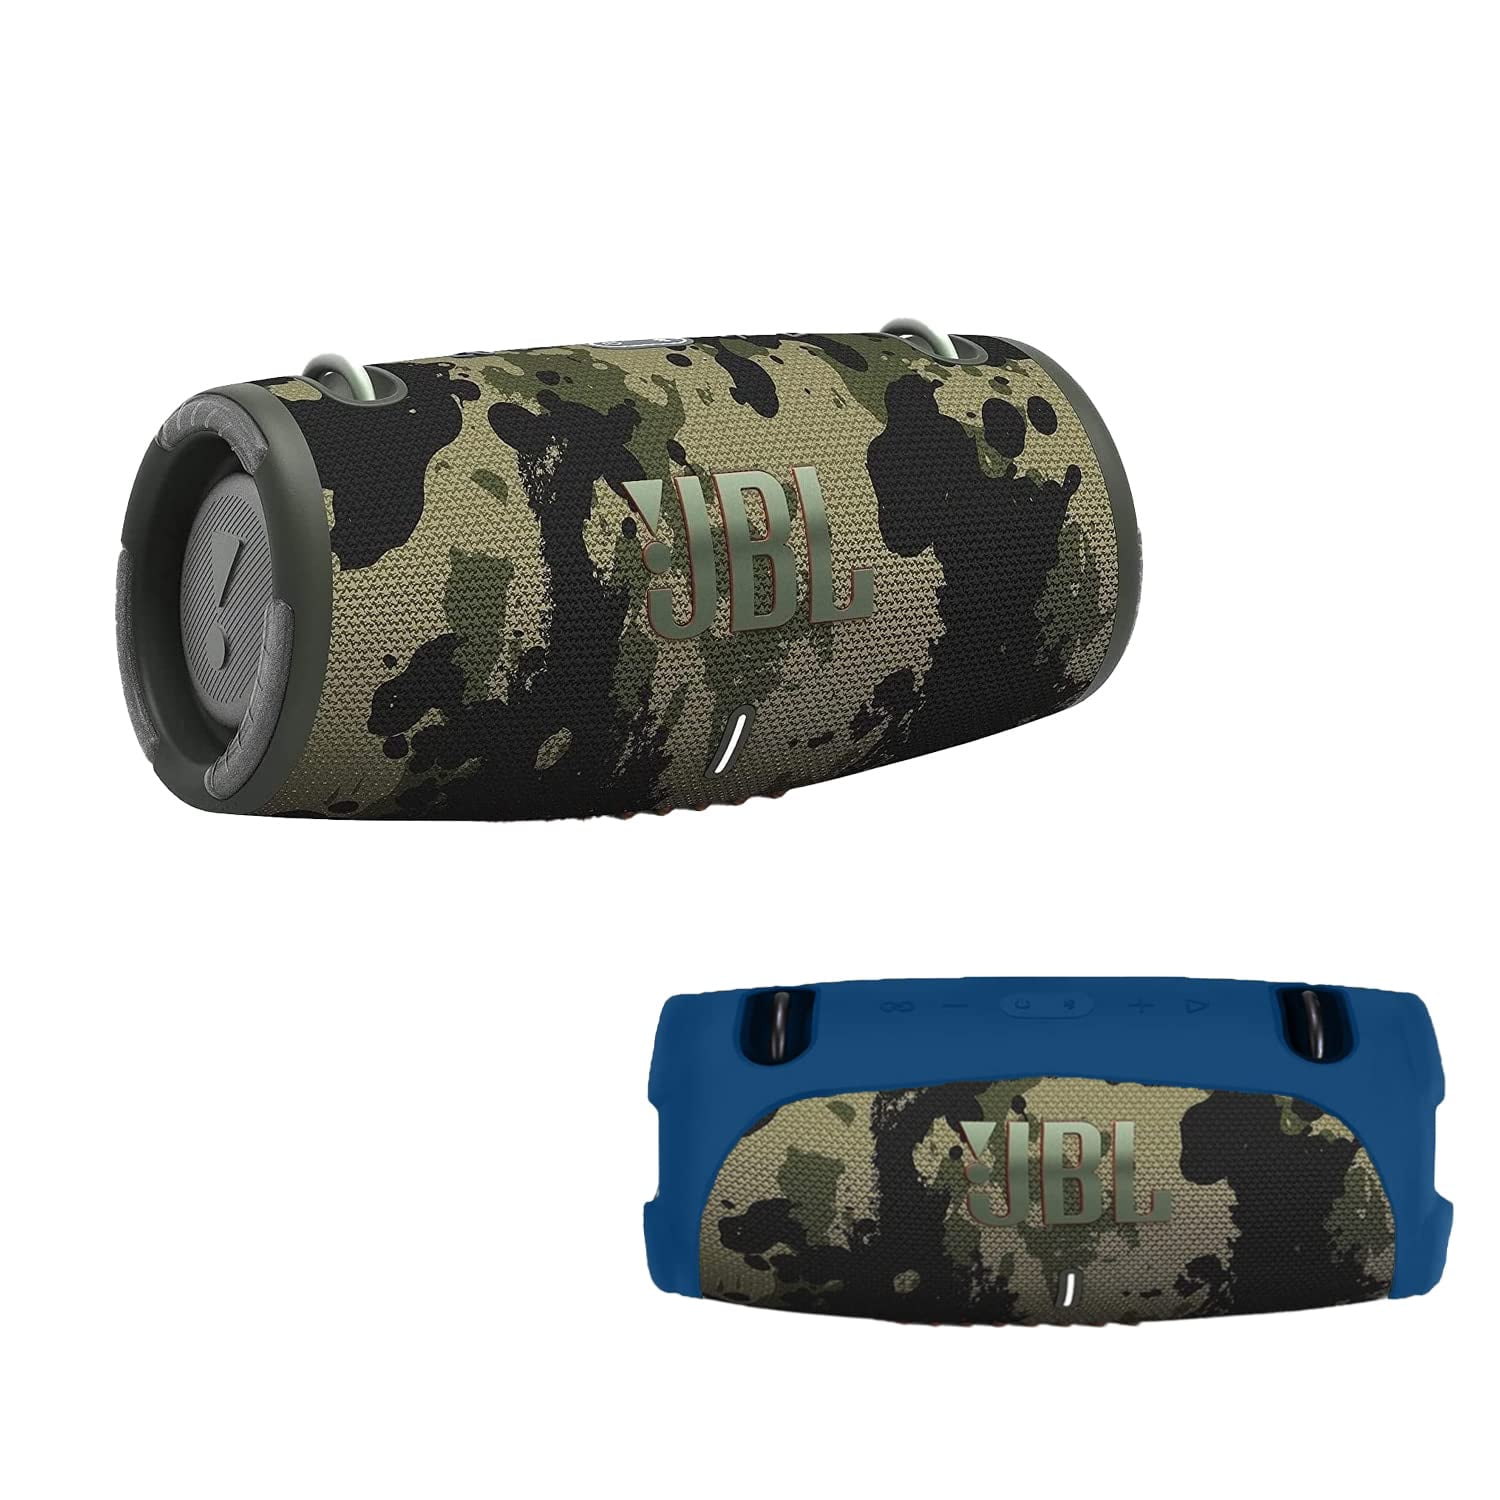 JBL Xtreme Portable Waterproof Bluetooth Speaker Bundle with gSport  Hardshell Case (Camo) ミニコンポ、ラジカセ